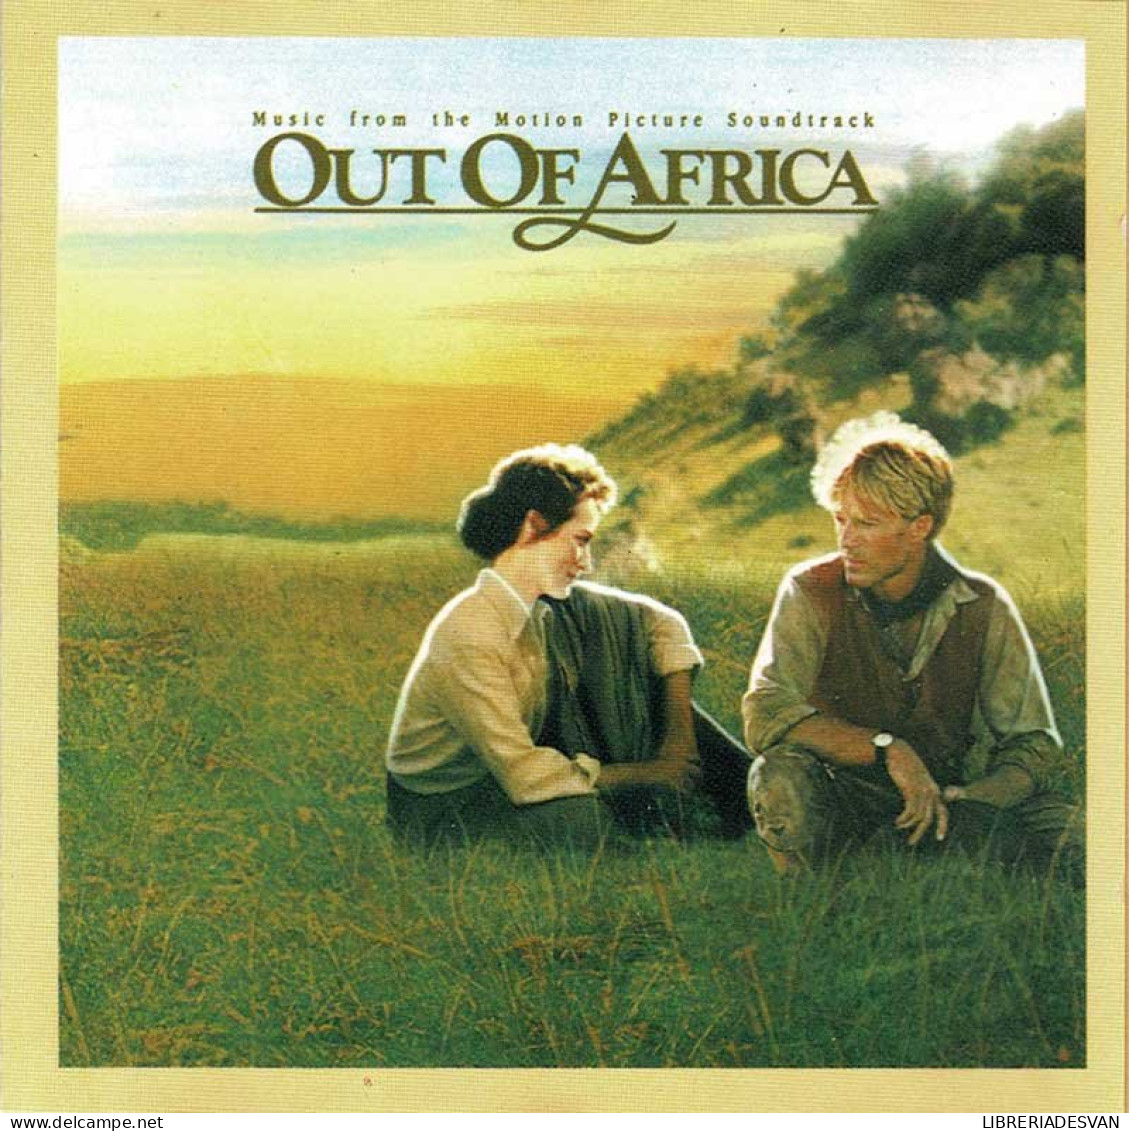 John Barry - Out Of Africa - Memorias De Africa (Music From The Motion Picture Soundtrack). CD - Musica Di Film